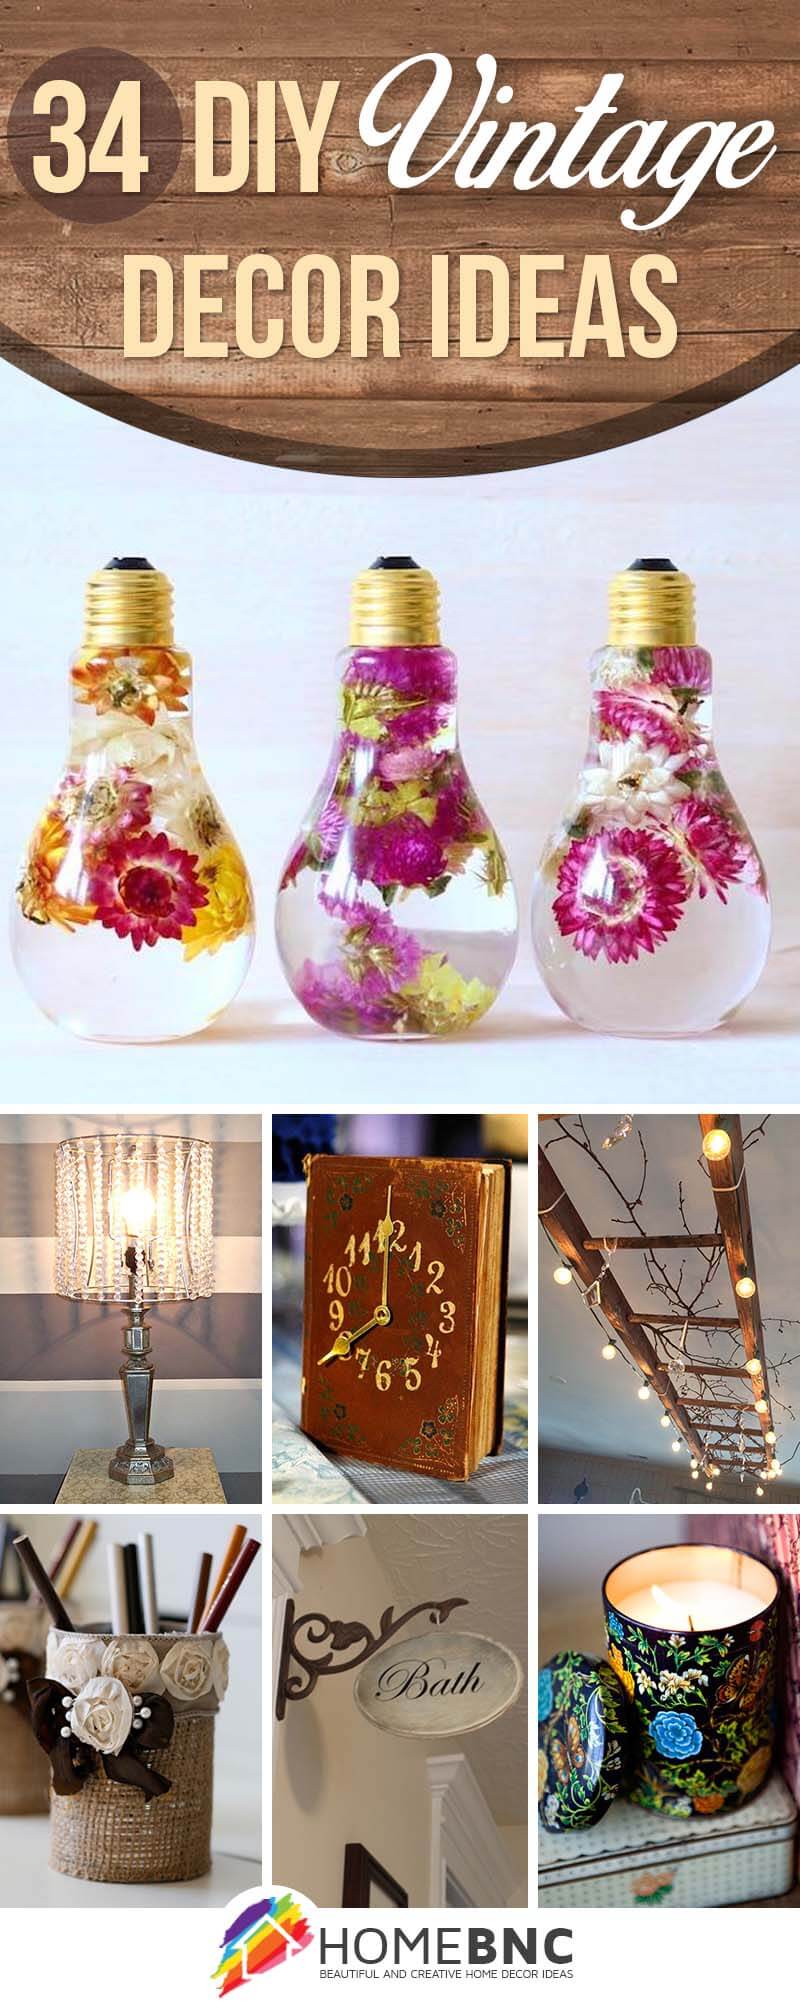 20 Best DIY Vintage Decor Ideas and Projects for 20